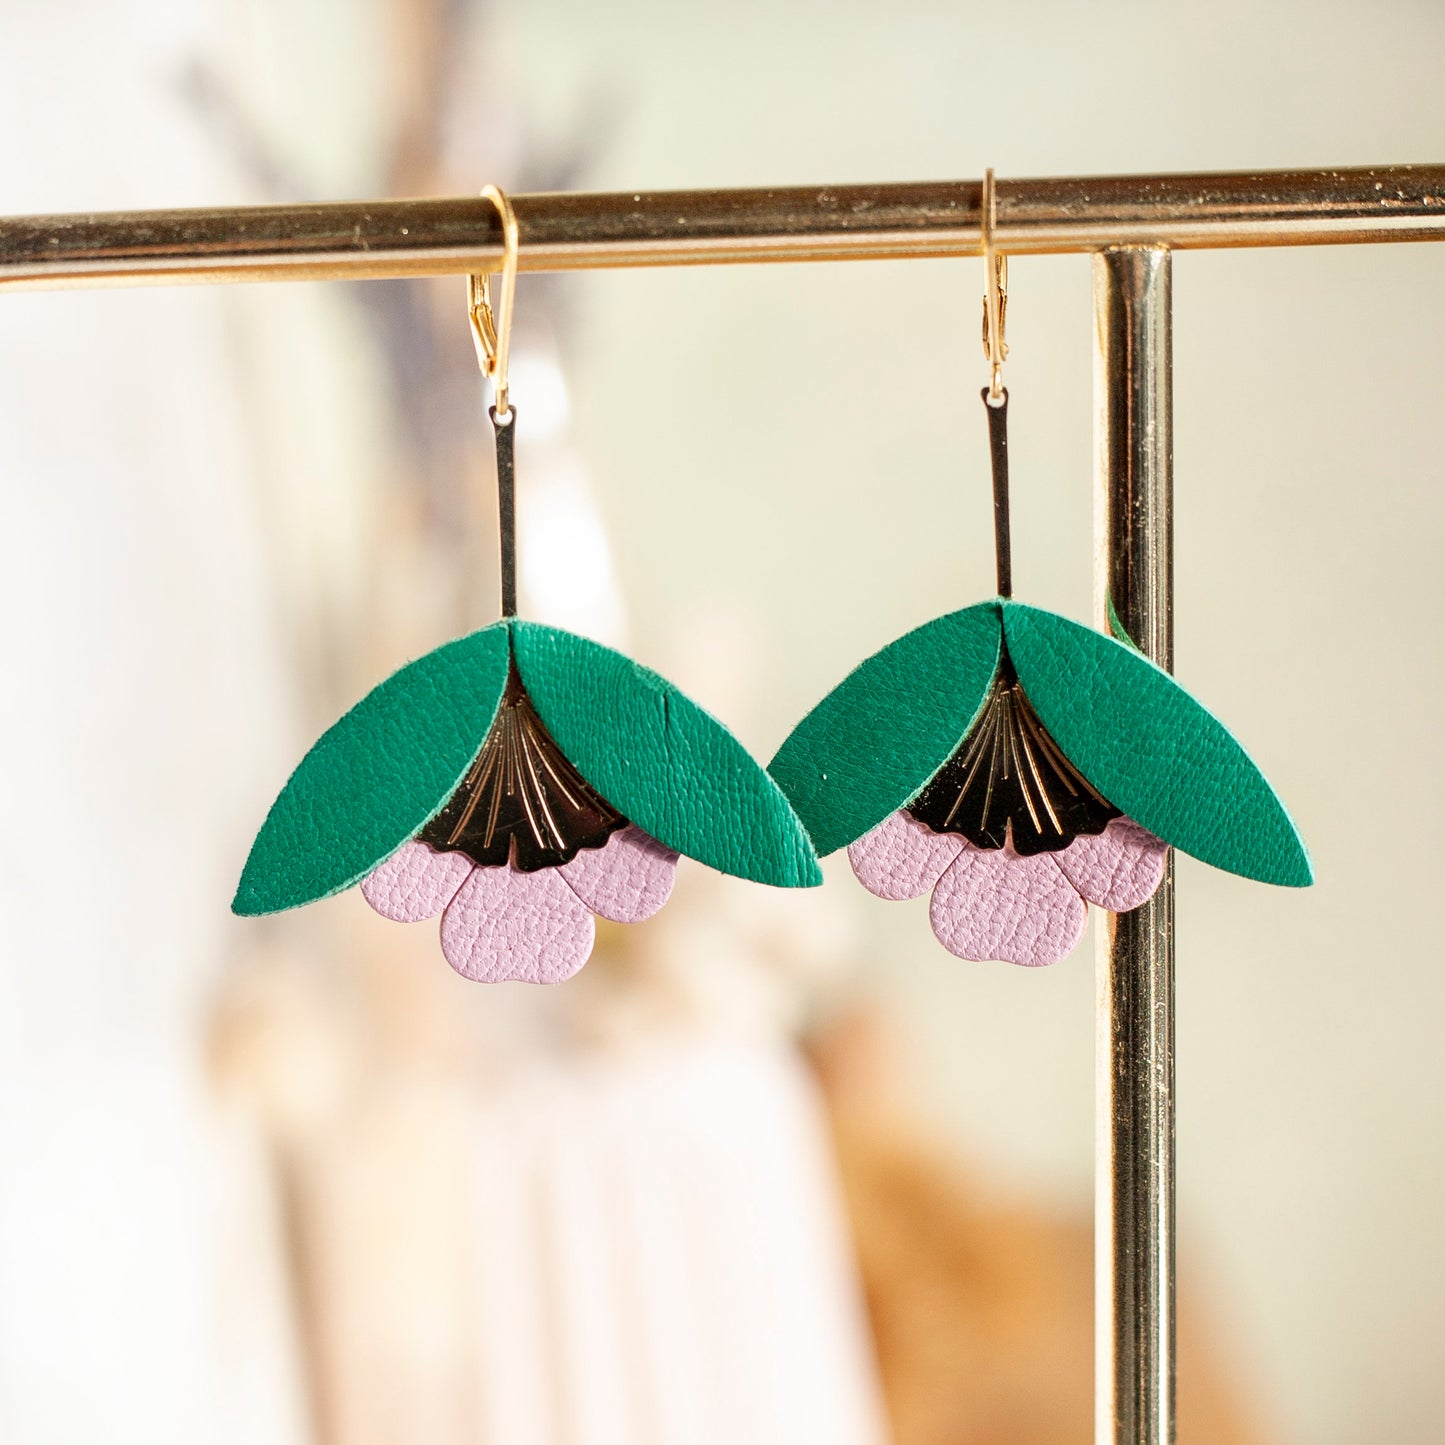 Ginkgo Flower earrings in green and pink recycled leather